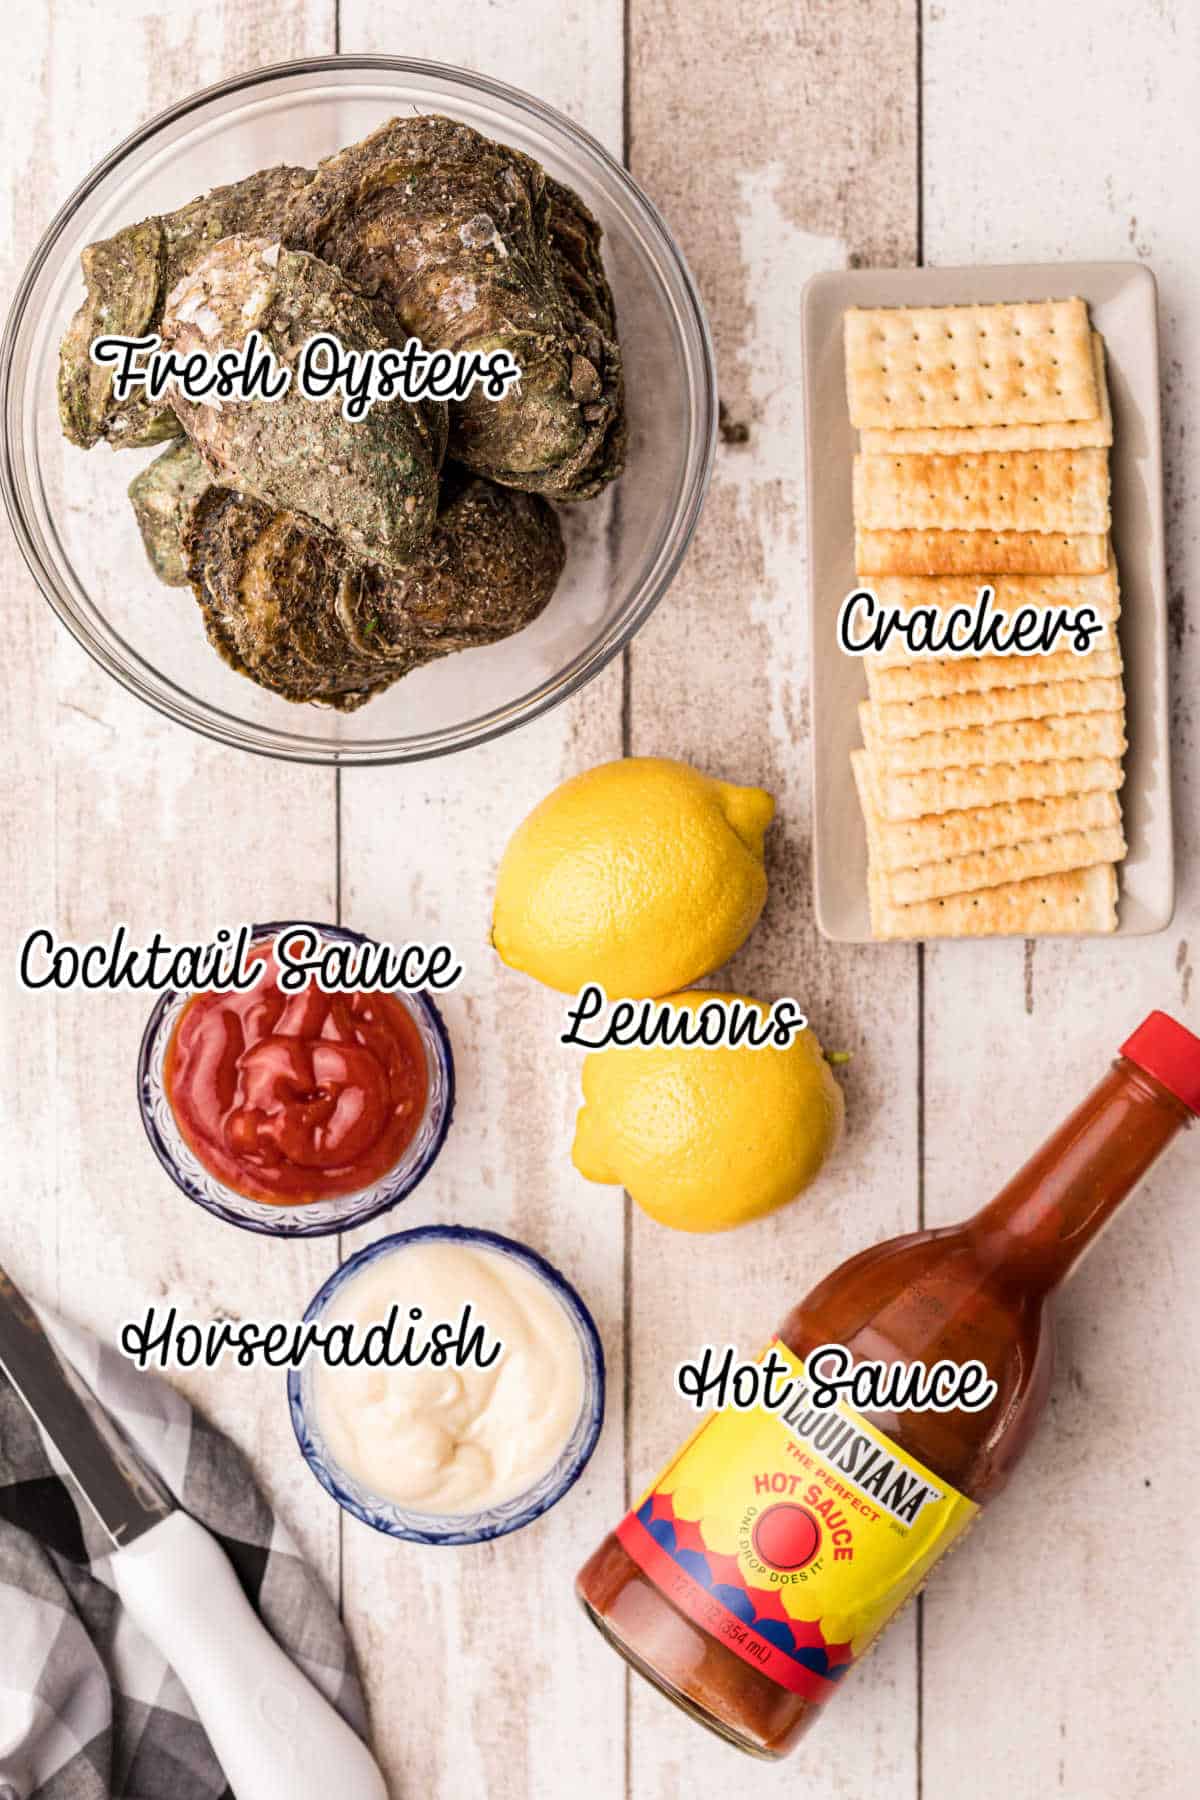 How to eat raw oysters - ingredients.